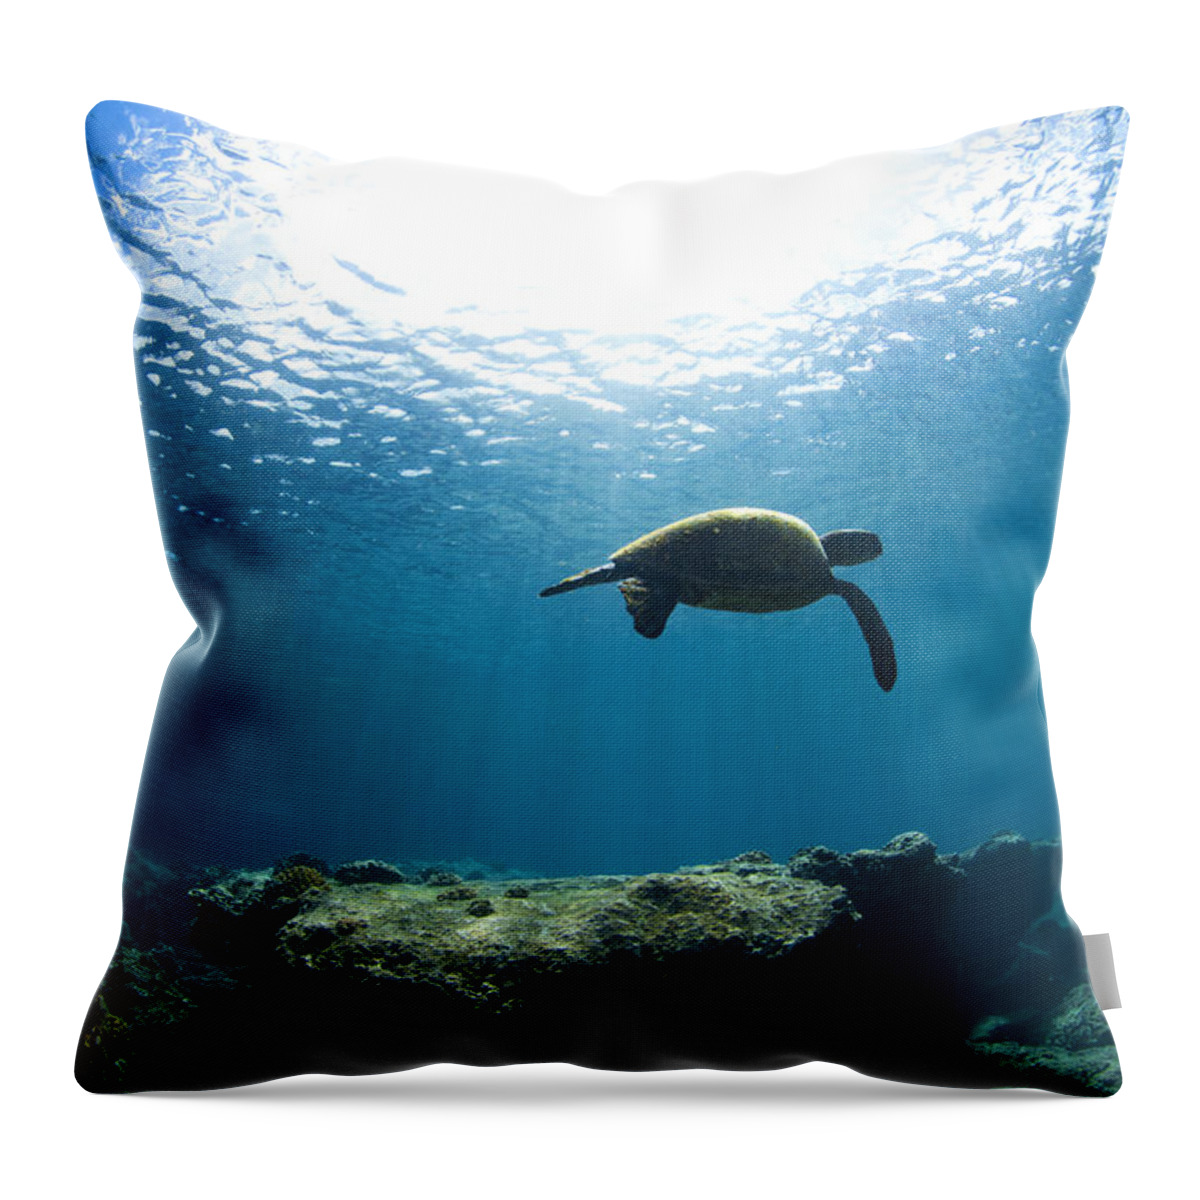 Sea Throw Pillow featuring the photograph Contemplation by Sean Davey